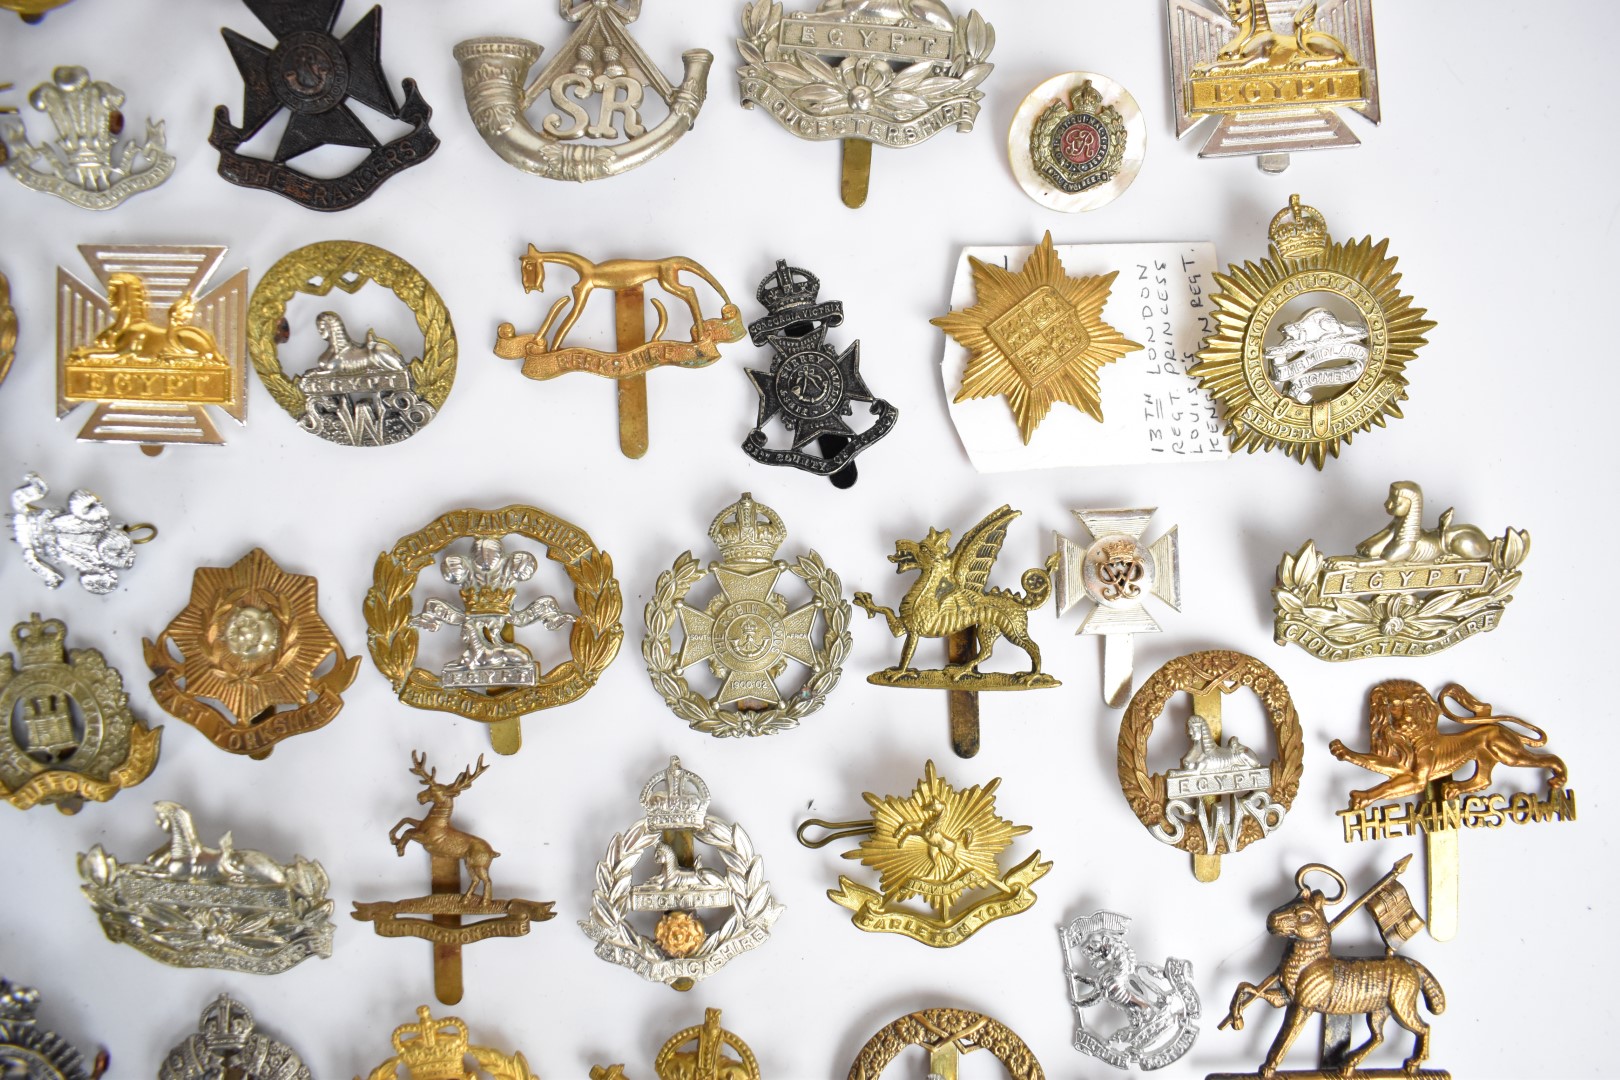 Large collection of approximately 100 British Army cap badges including Royal Sussex Regiment, - Image 4 of 14